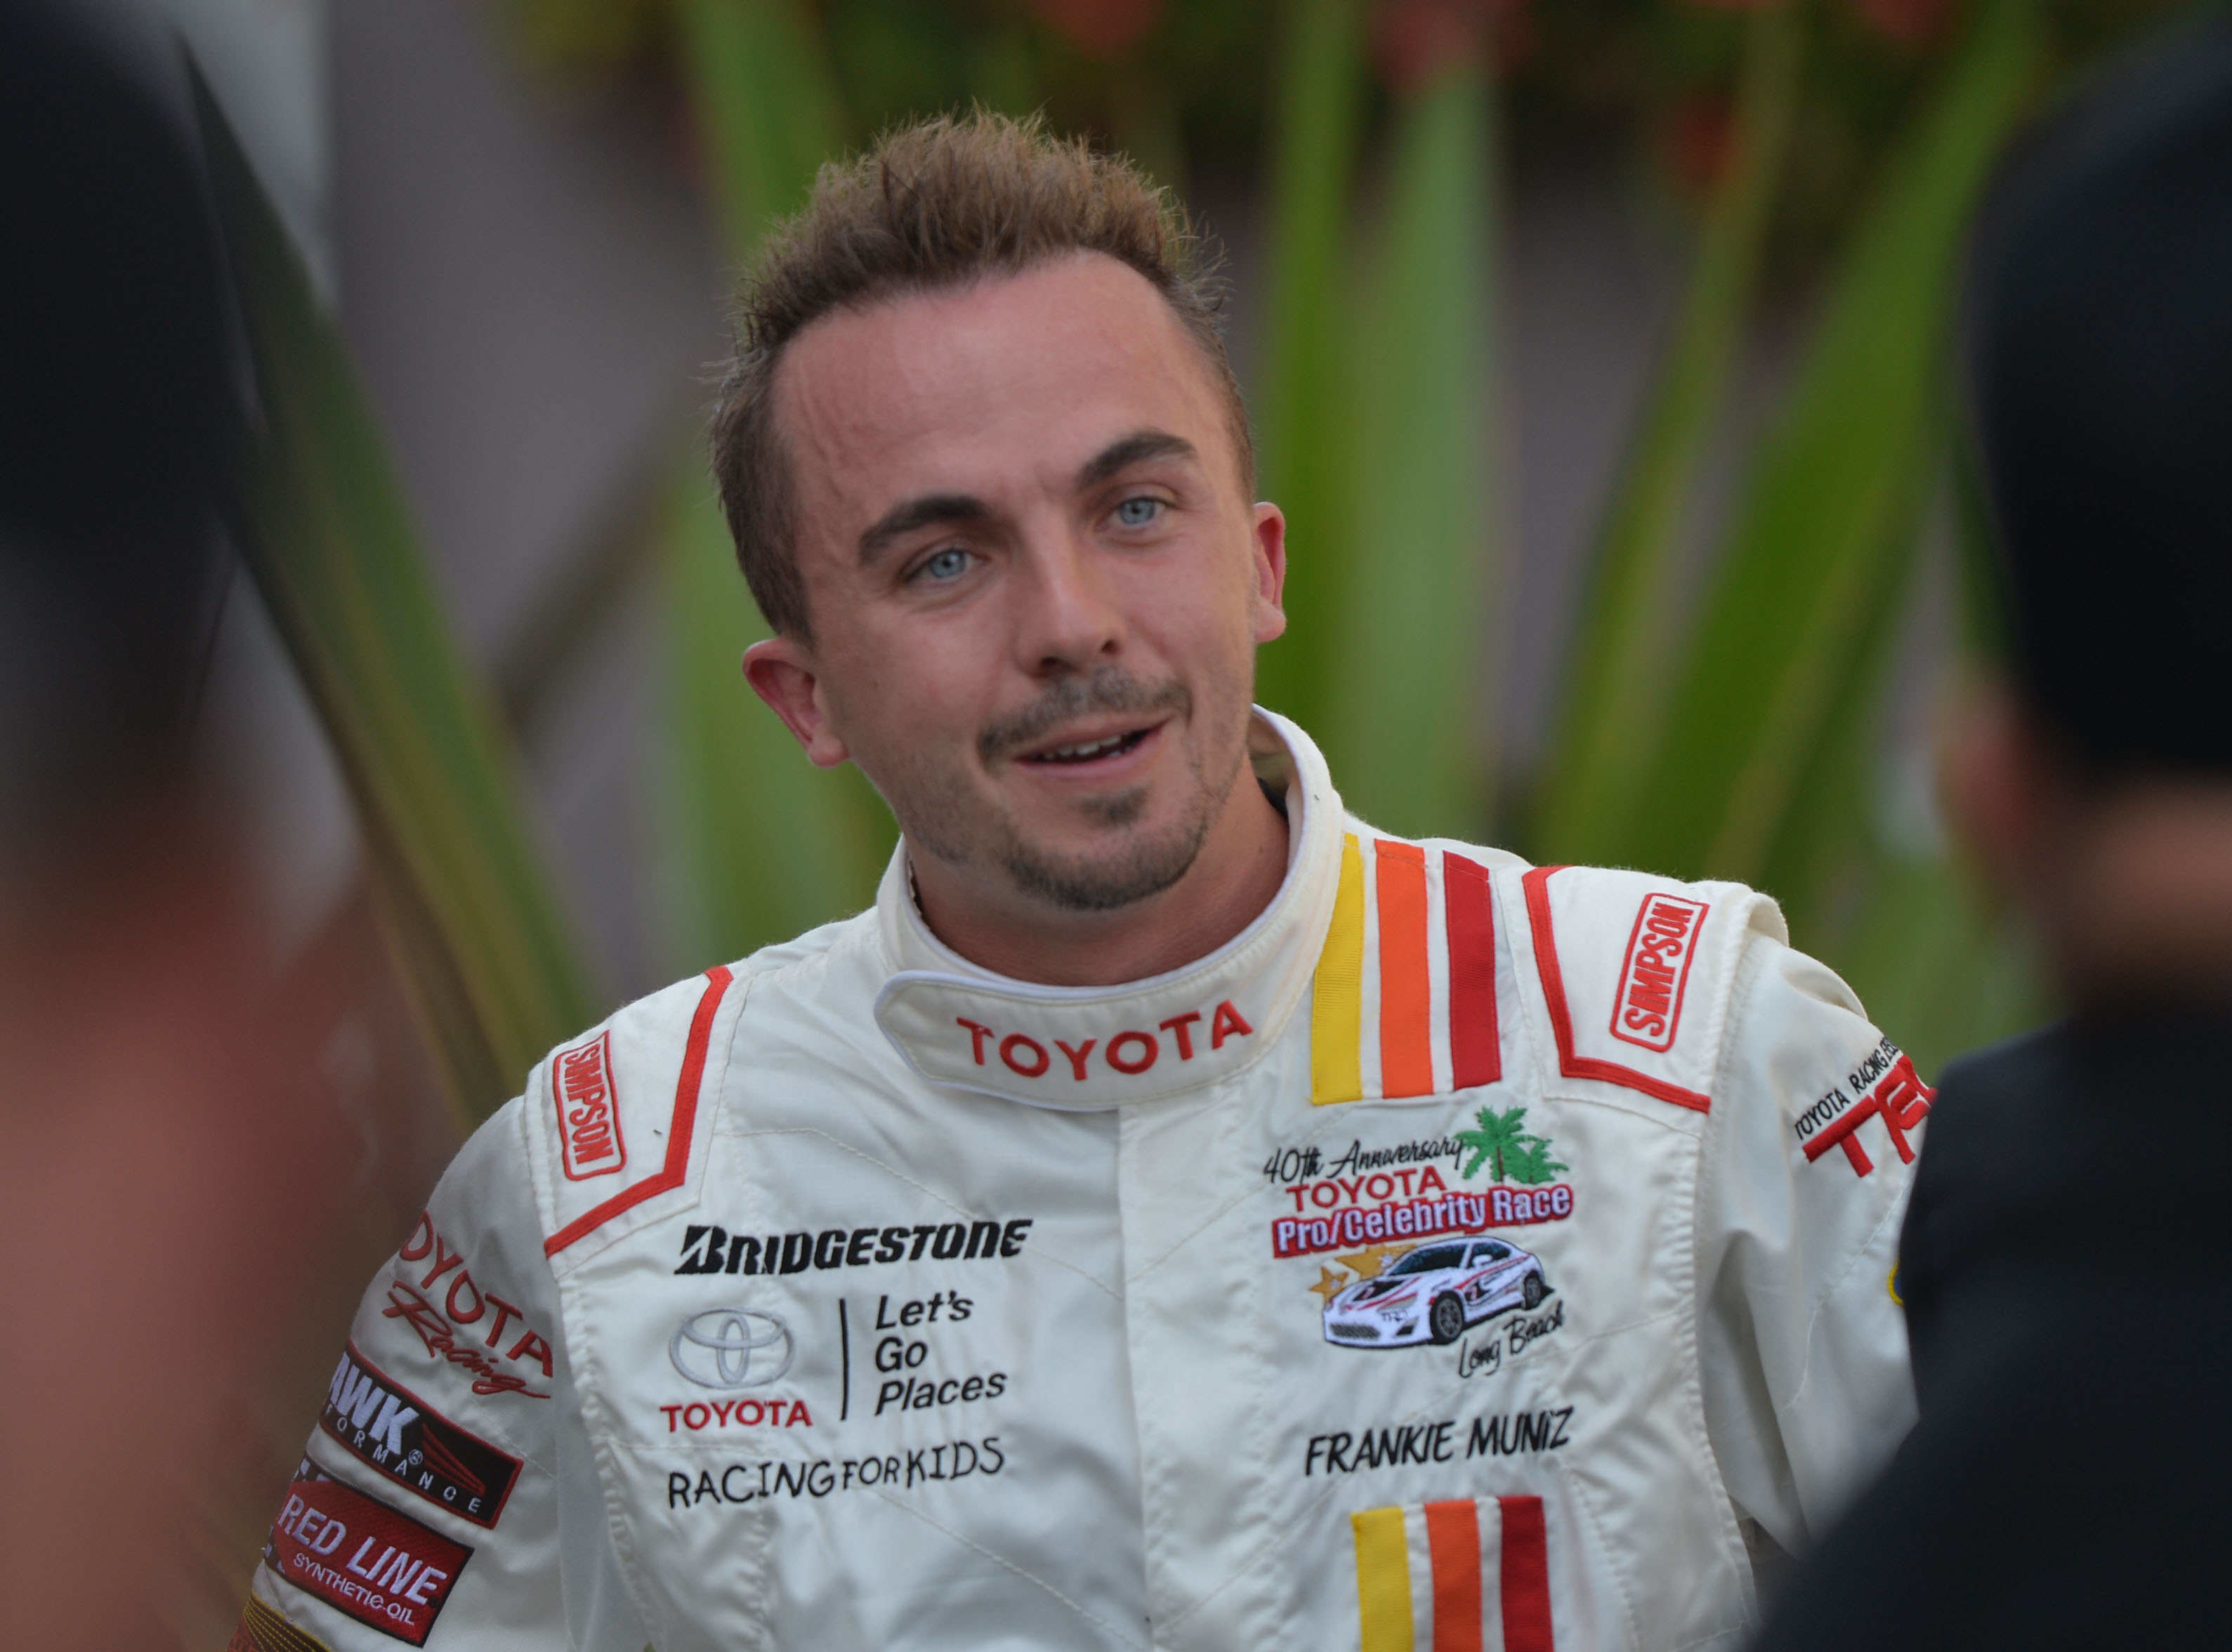 Frankie Muniz in white racing suit with Toyota and other sponsors&#x27; logos, smiling